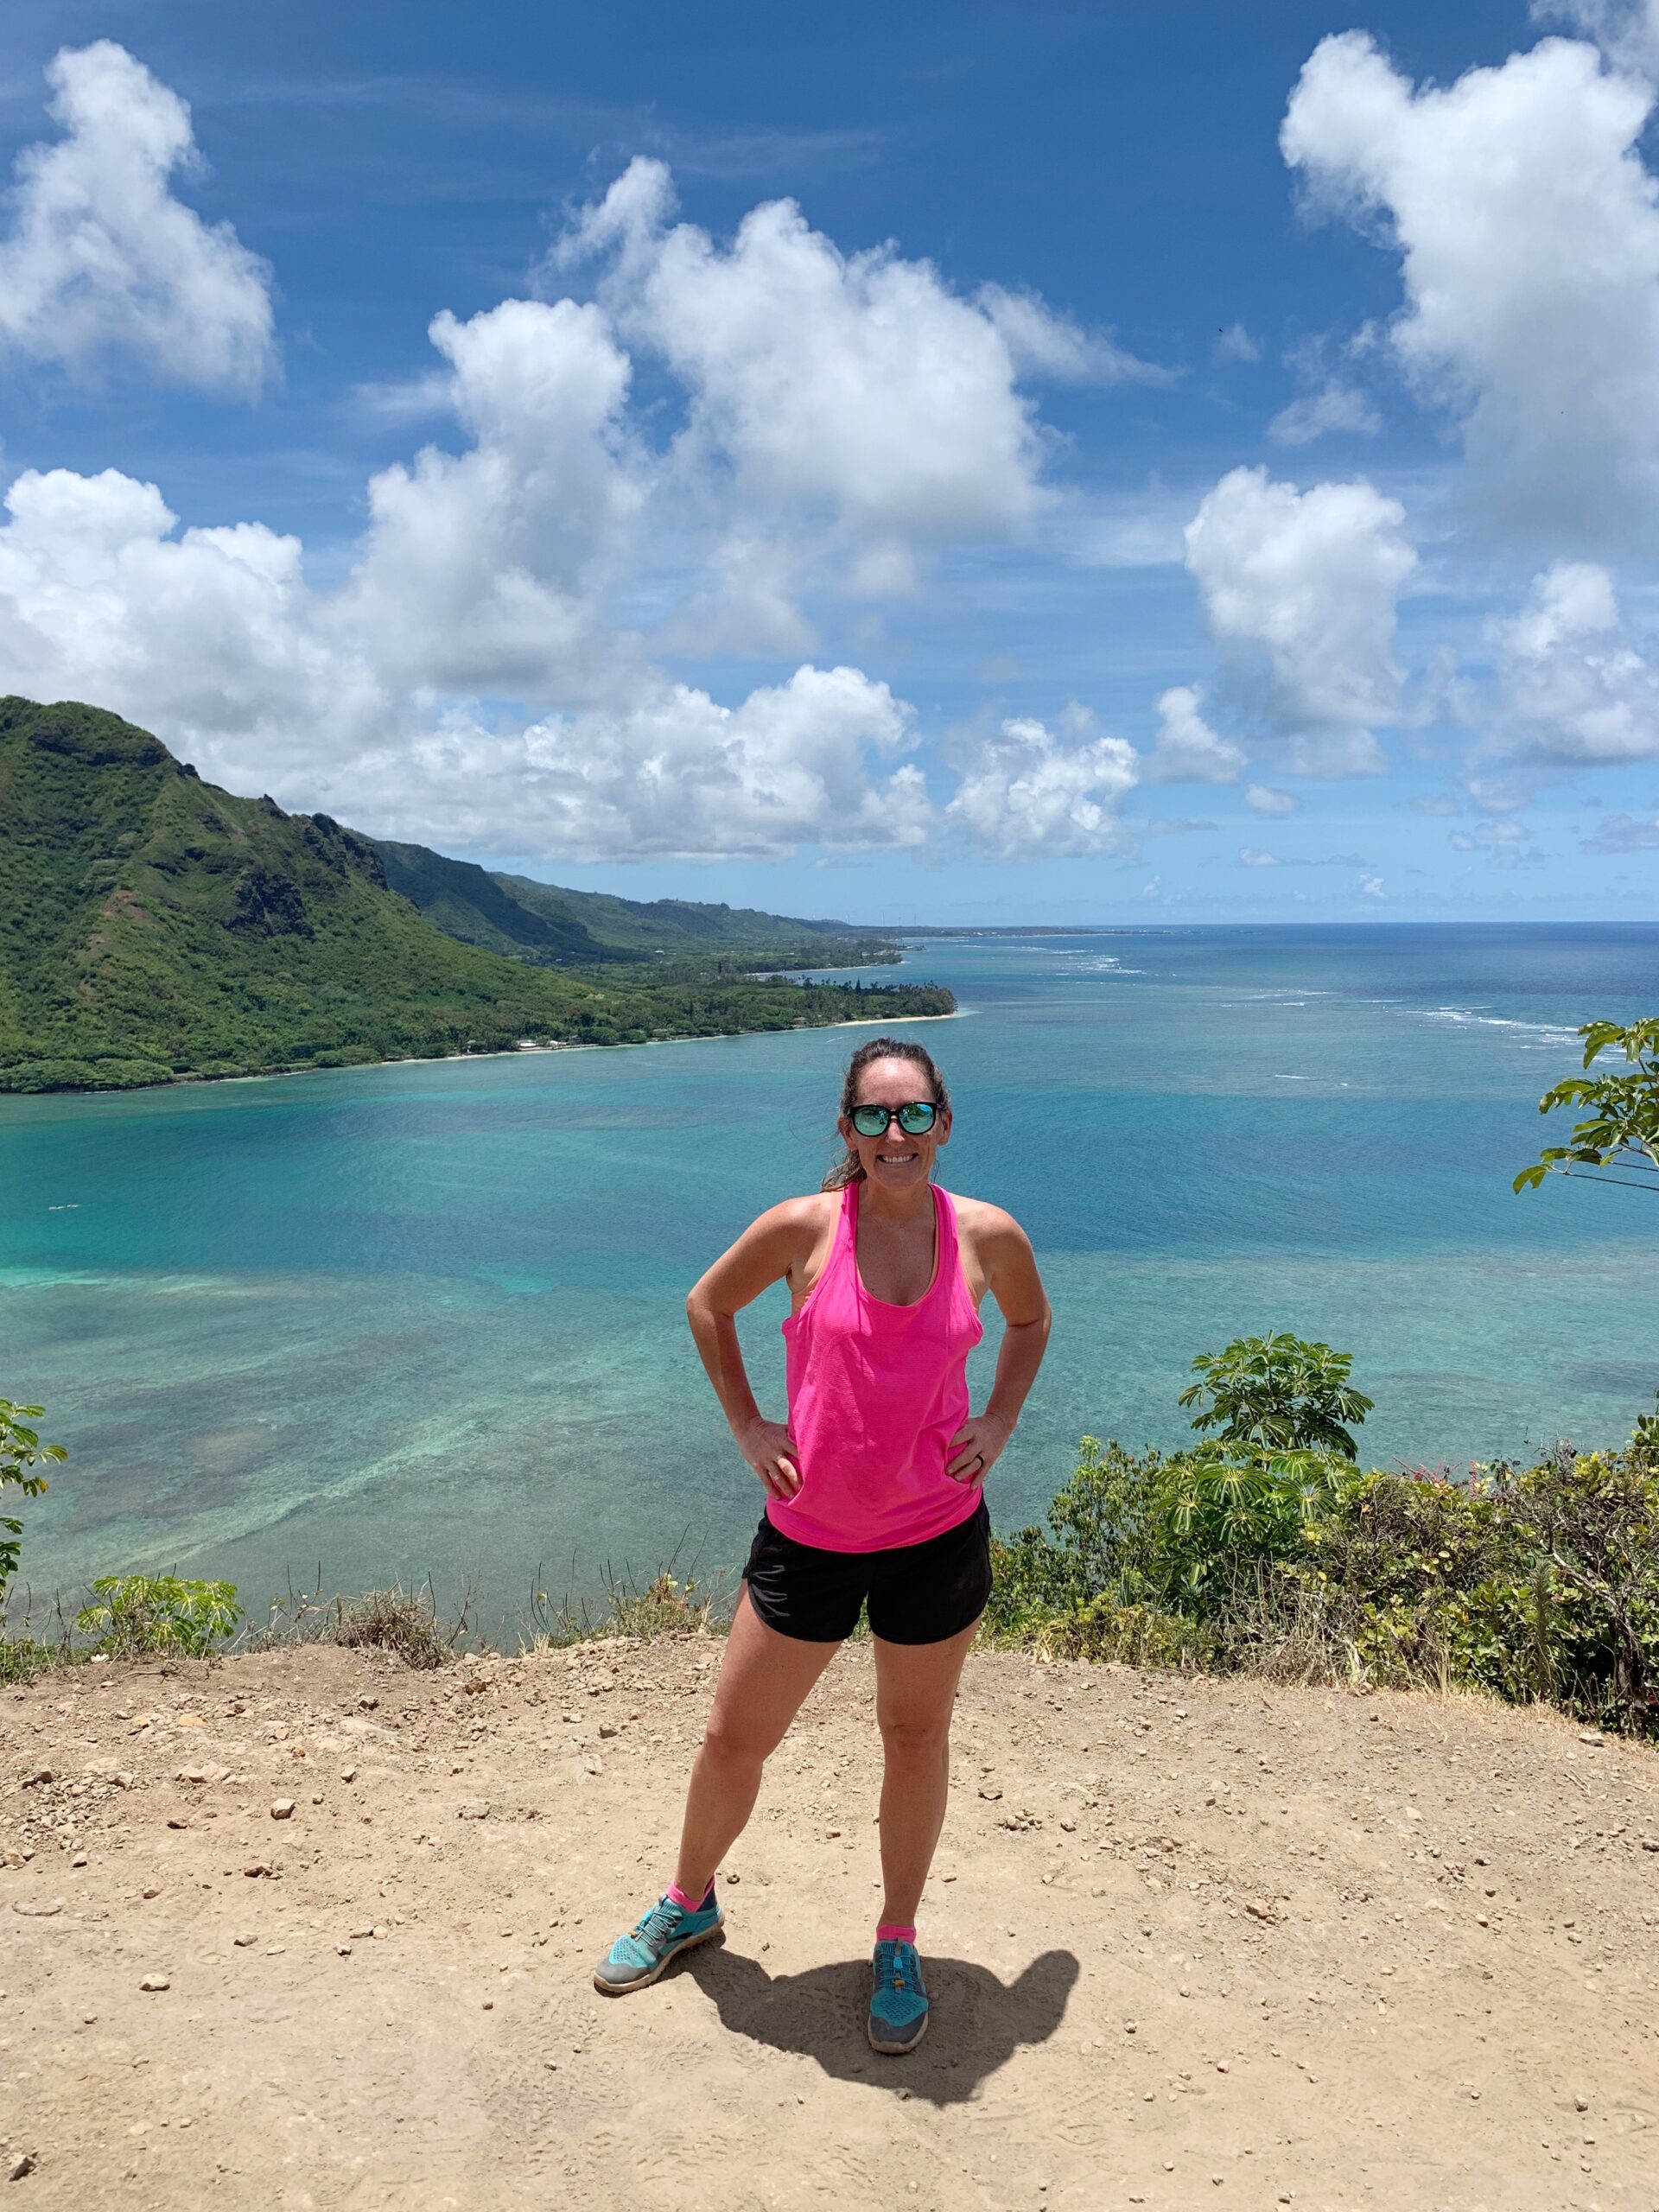 Hiking In Hawaii: Crouching Lion Hike - Ready to go hiking in Hawaii? The Crouching Lion hike is not for the faint of heart, but the views are worth it! | Crouching Lion Hike | Crouching Lion Hawaii | Oahu Hikes 